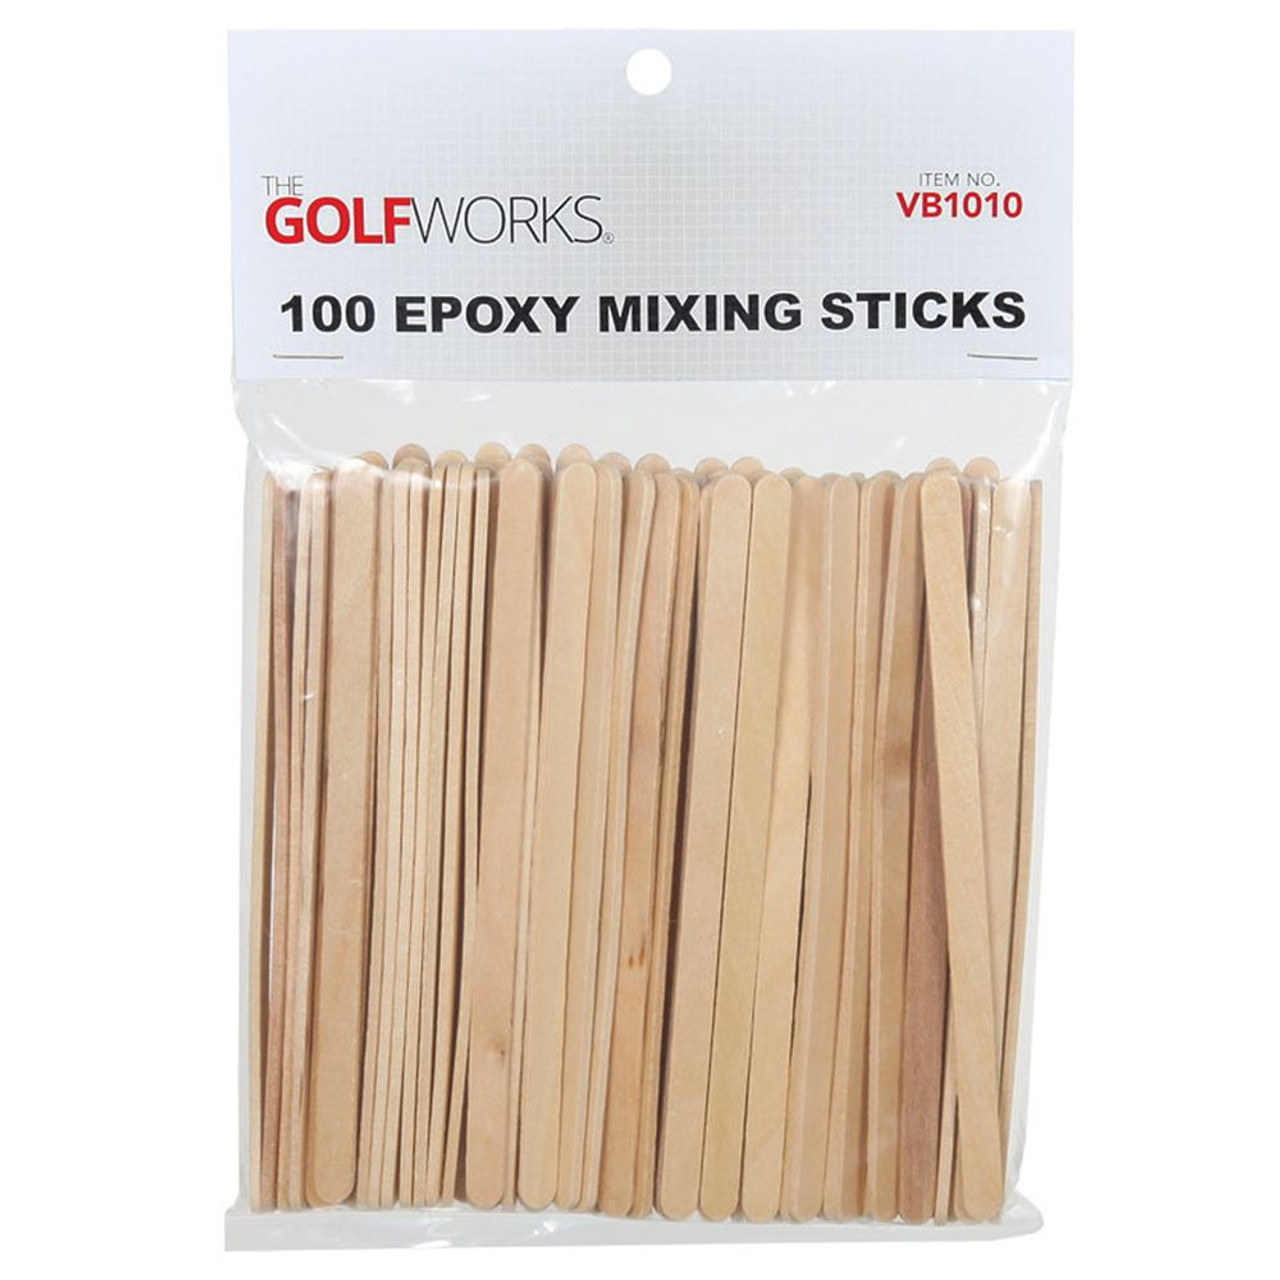 Epoxy Applicator and Mixing Sticks (100 pk) - The GolfWorks